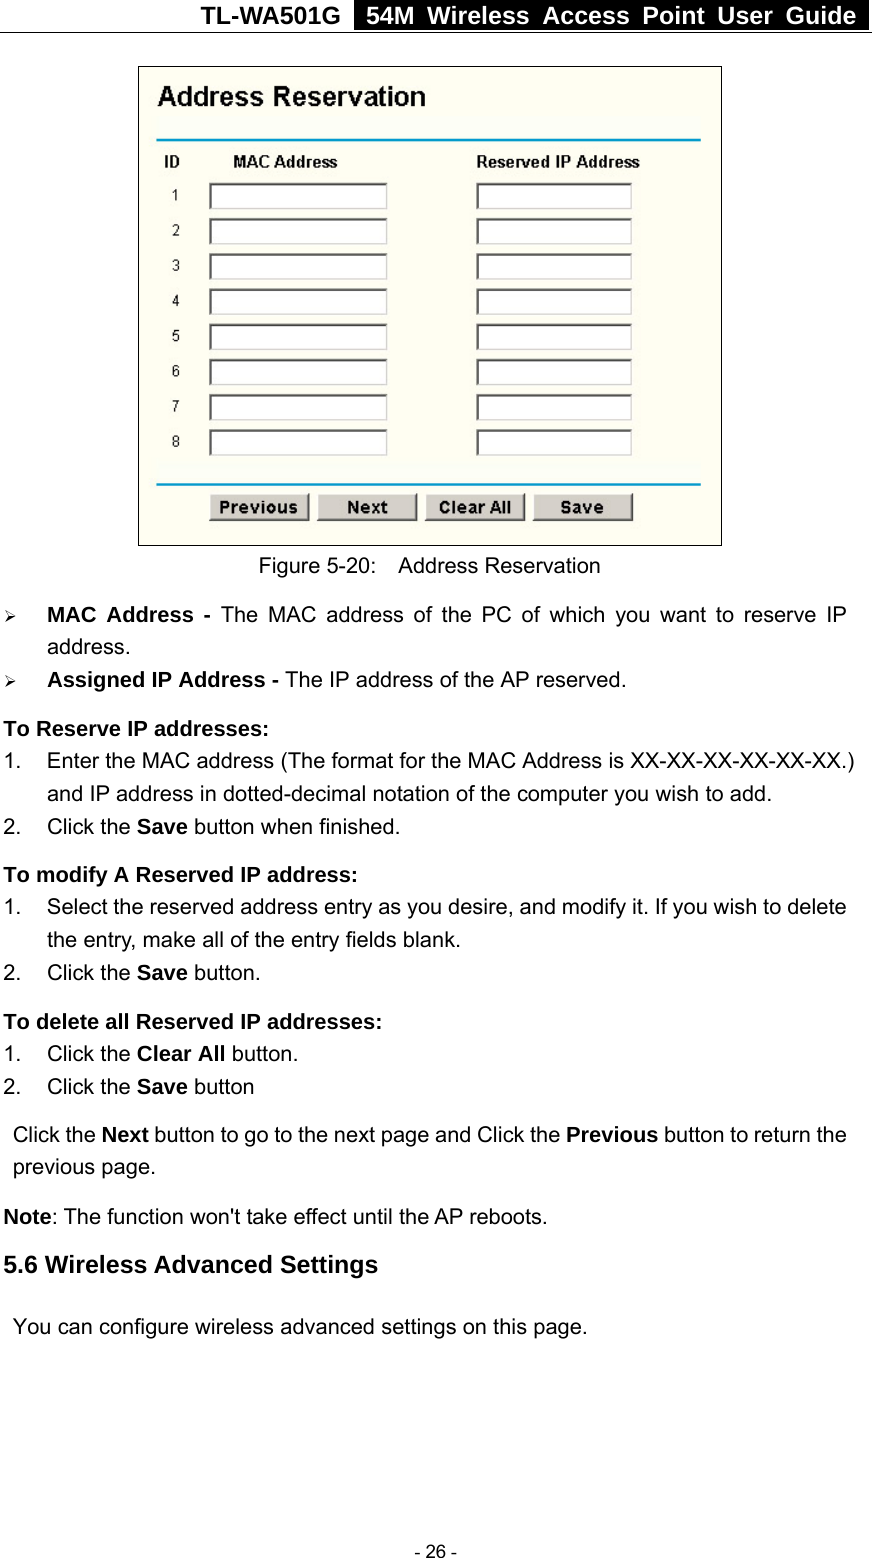 TL-WA501G   54M Wireless Access Point User Guide   Figure 5-20:  Address Reservation ¾ MAC Address - The MAC address of the PC of which you want to reserve IP address. ¾ Assigned IP Address - The IP address of the AP reserved. To Reserve IP addresses:  1.  Enter the MAC address (The format for the MAC Address is XX-XX-XX-XX-XX-XX.) and IP address in dotted-decimal notation of the computer you wish to add.   2. Click the Save button when finished.   To modify A Reserved IP address:  1.  Select the reserved address entry as you desire, and modify it. If you wish to delete the entry, make all of the entry fields blank. 2. Click the Save button.   To delete all Reserved IP addresses: 1. Click the Clear All button. 2. Click the Save button Click the Next button to go to the next page and Click the Previous button to return the previous page. Note: The function won&apos;t take effect until the AP reboots. 5.6 Wireless Advanced Settings You can configure wireless advanced settings on this page.  - 26 - 